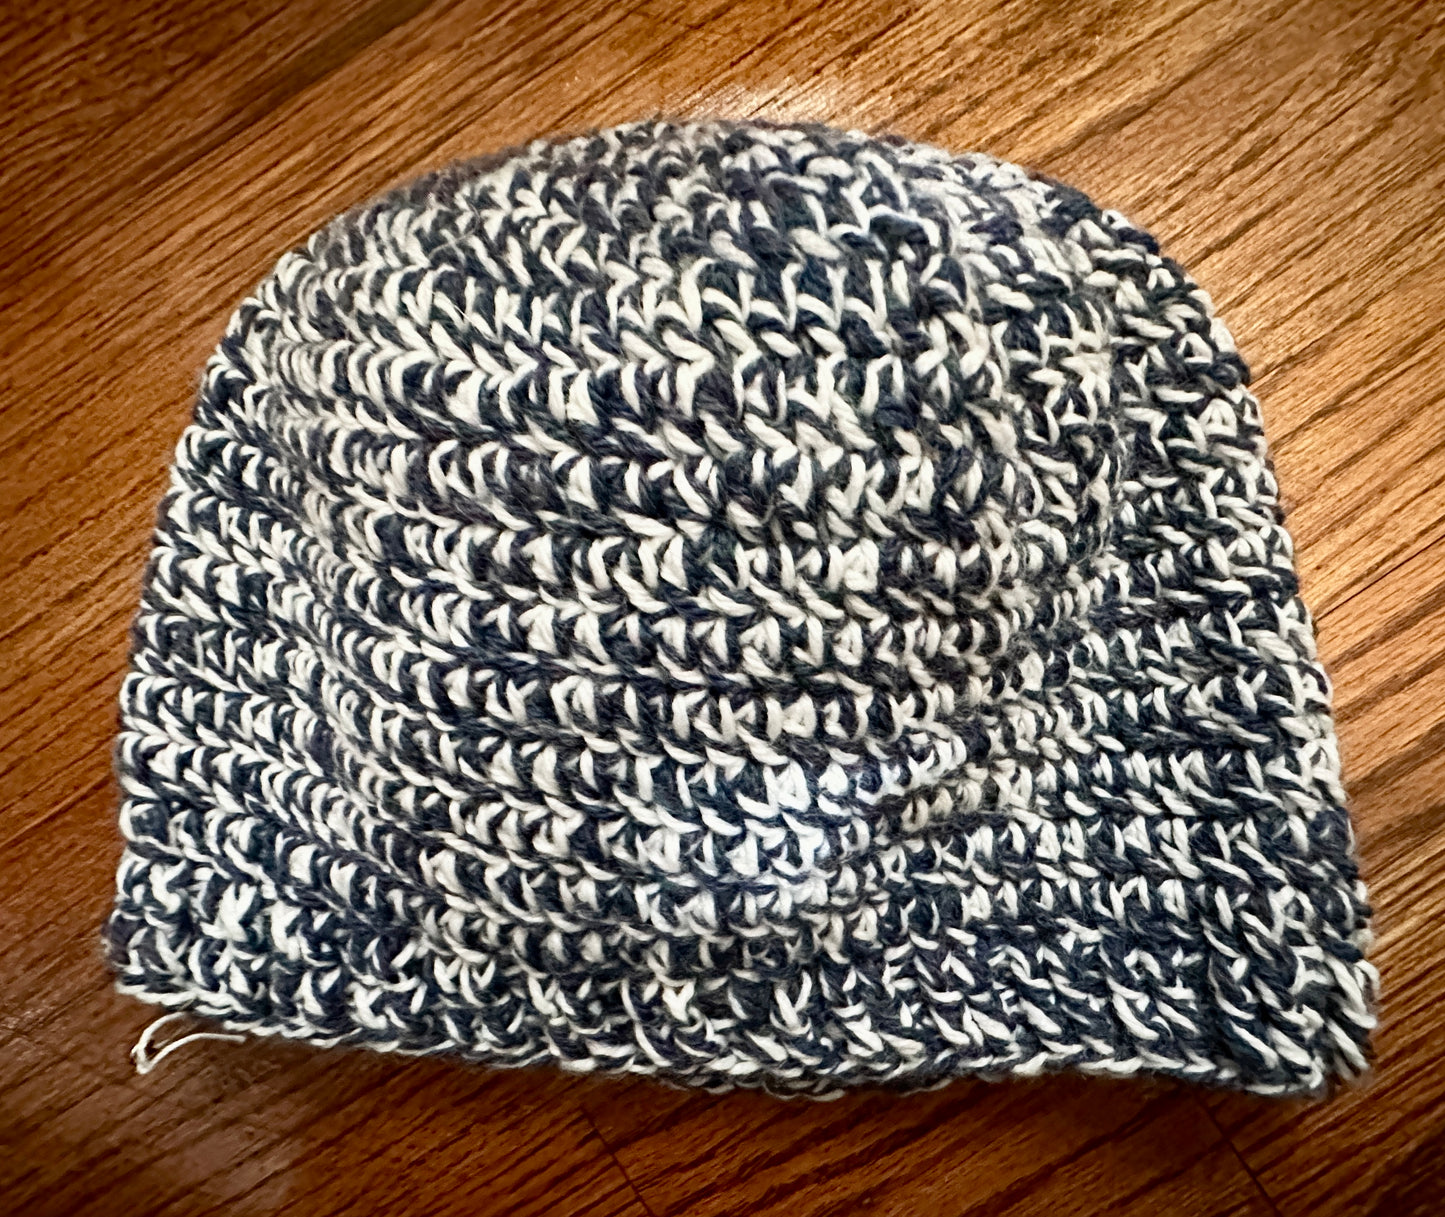 Navy and Aqua Variegated Striped Crocheted Adult Hat by Nancy Stratman